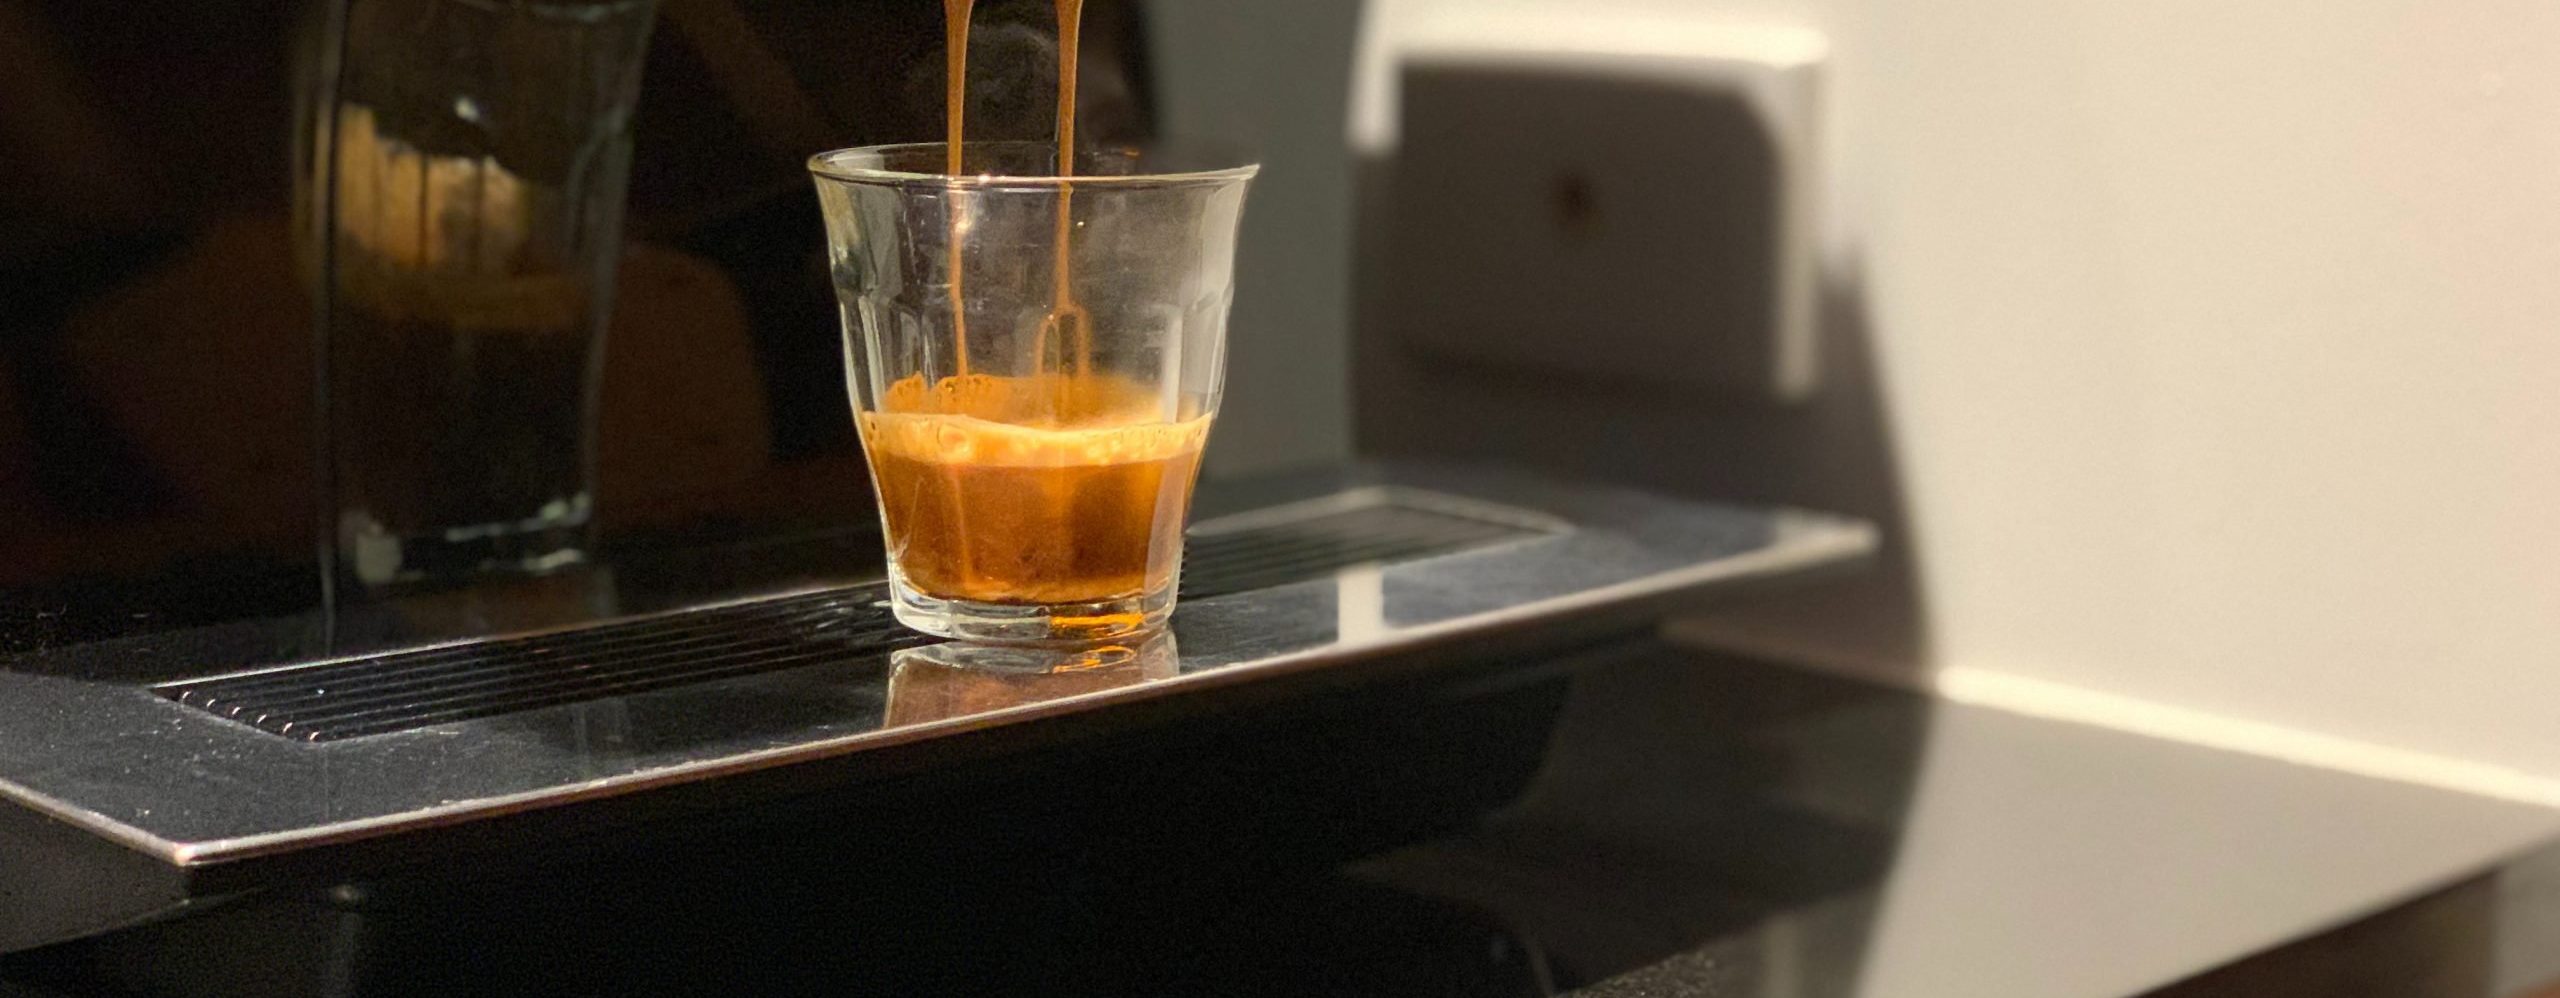 Pulling a espresso in a french glass